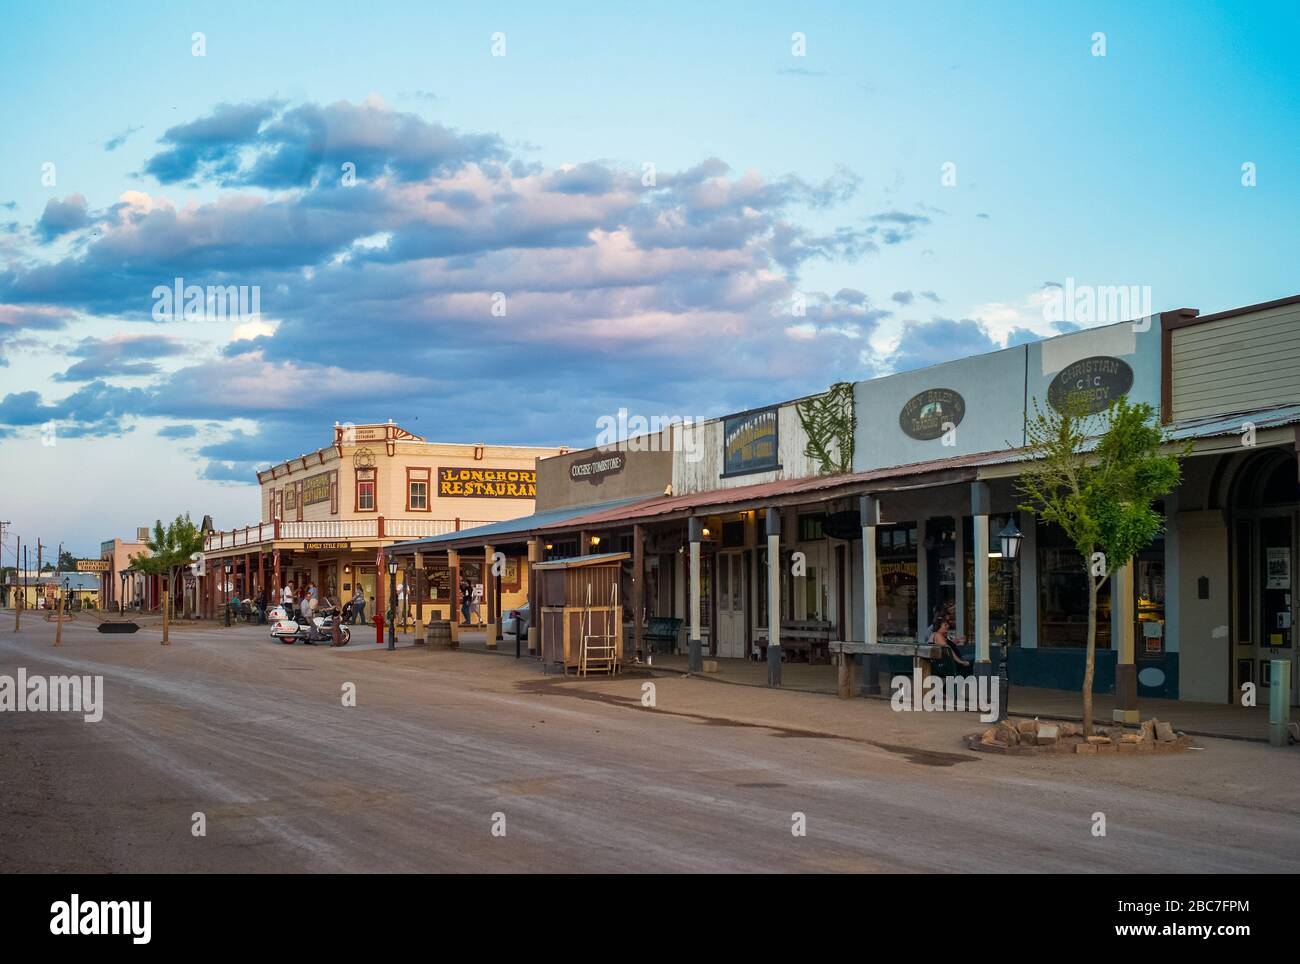 Tombstone, Arizona, United States - July 12 2009: Allen Street at Dusk with Longhorn Restaurant Saloon, a Historic Wild West Location. Stock Photo